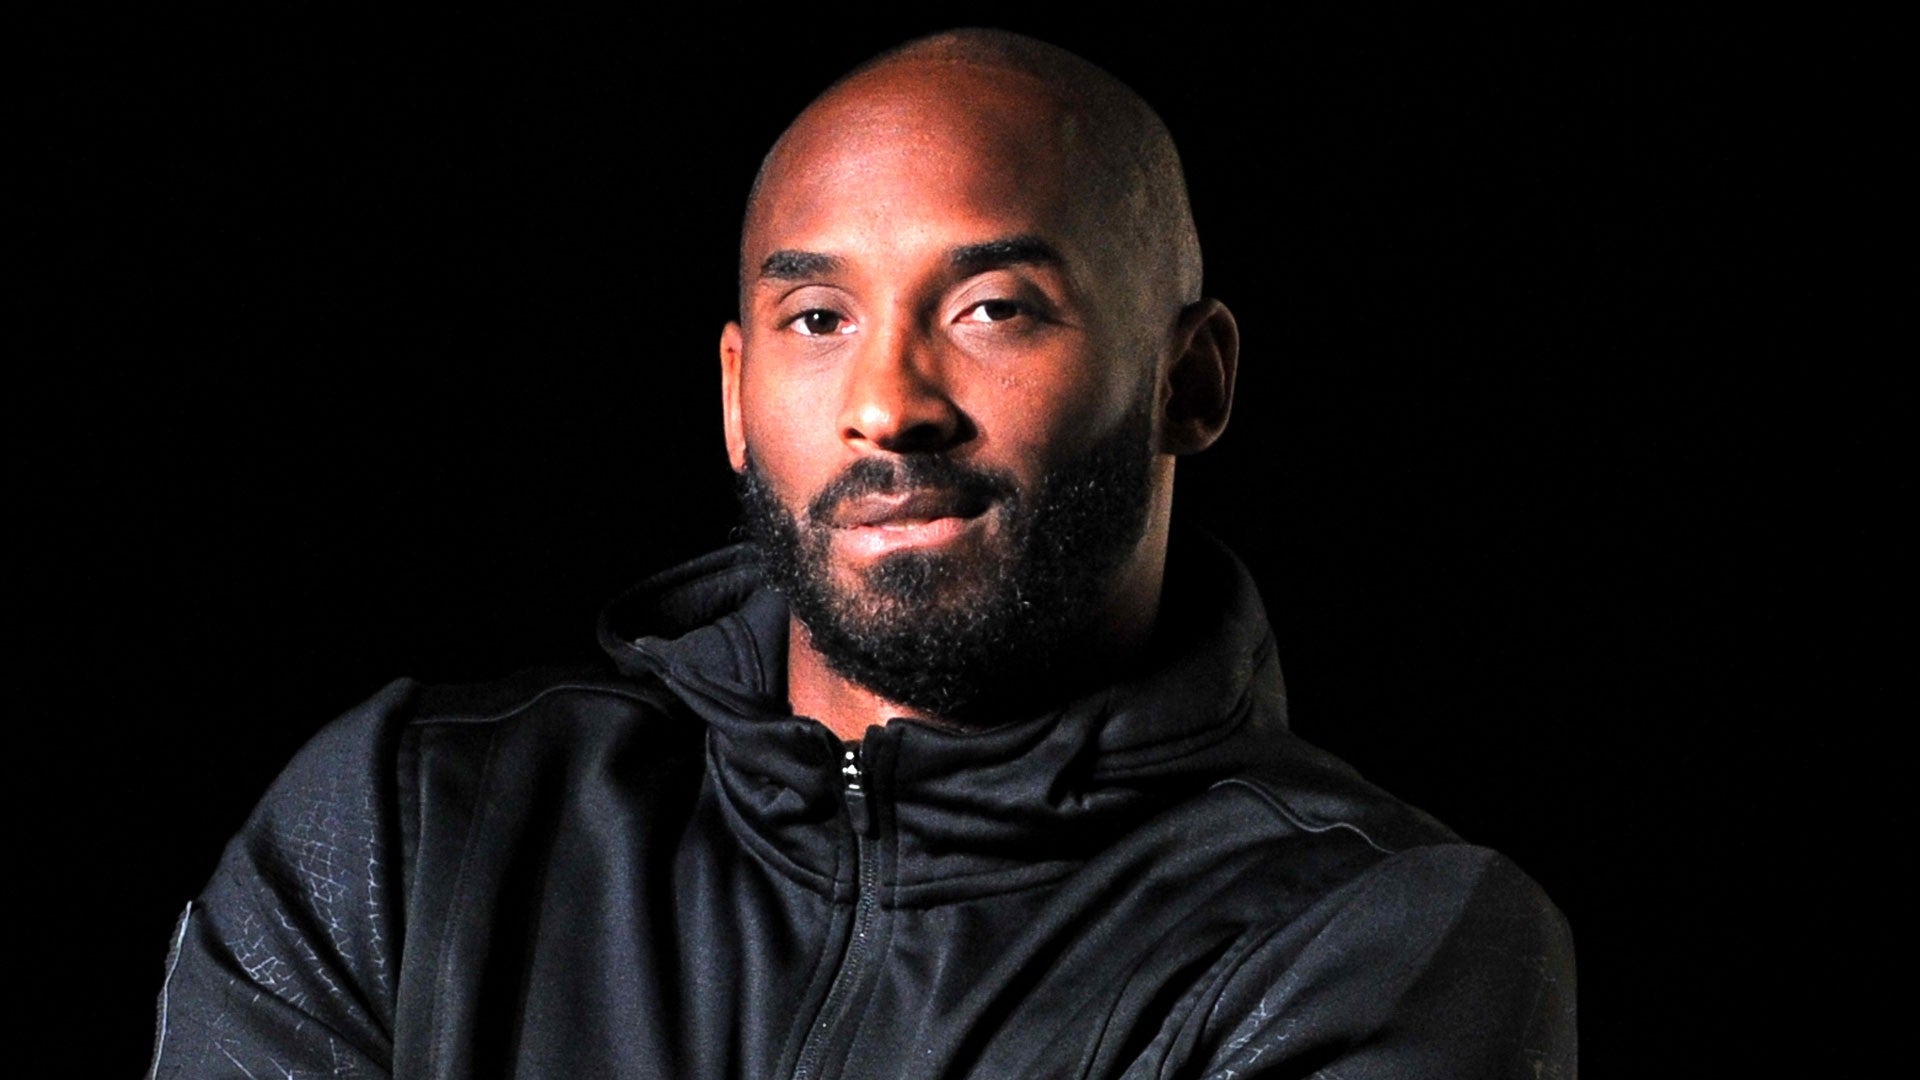 Super Bowl 2020 Game to Pay Special Tribute to Kobe Bryant